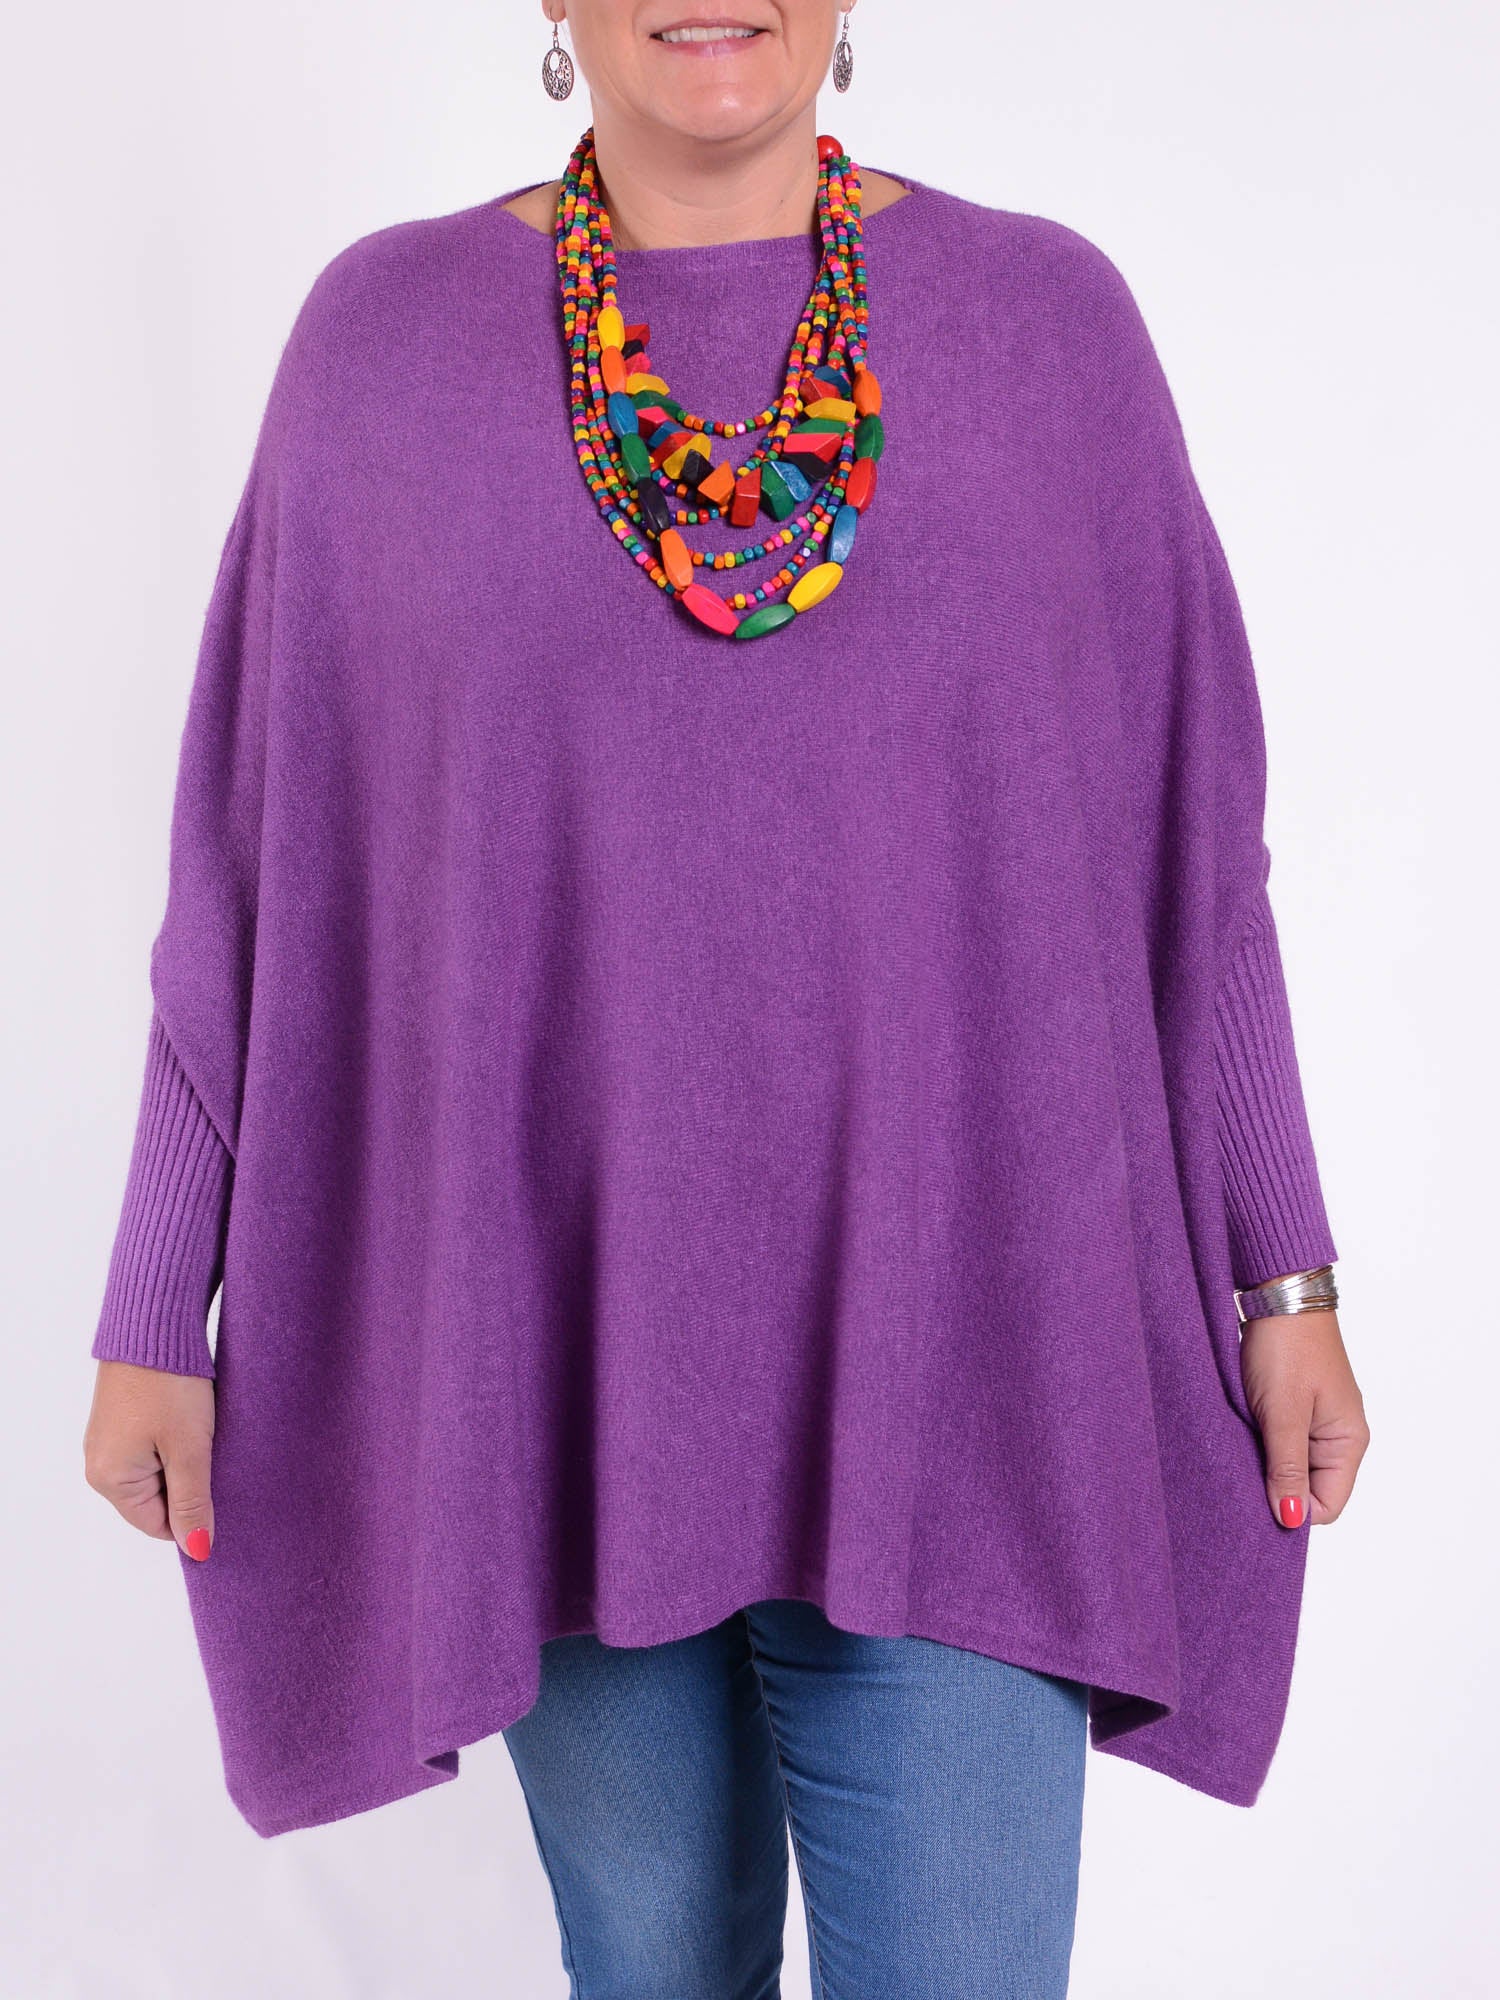 Soft Knit Batwing Sleeve Jumper  - 2700, Jumpers & Cardigans, Pure Plus Clothing, Lagenlook Clothing, Plus Size Fashion, Over 50 Fashion